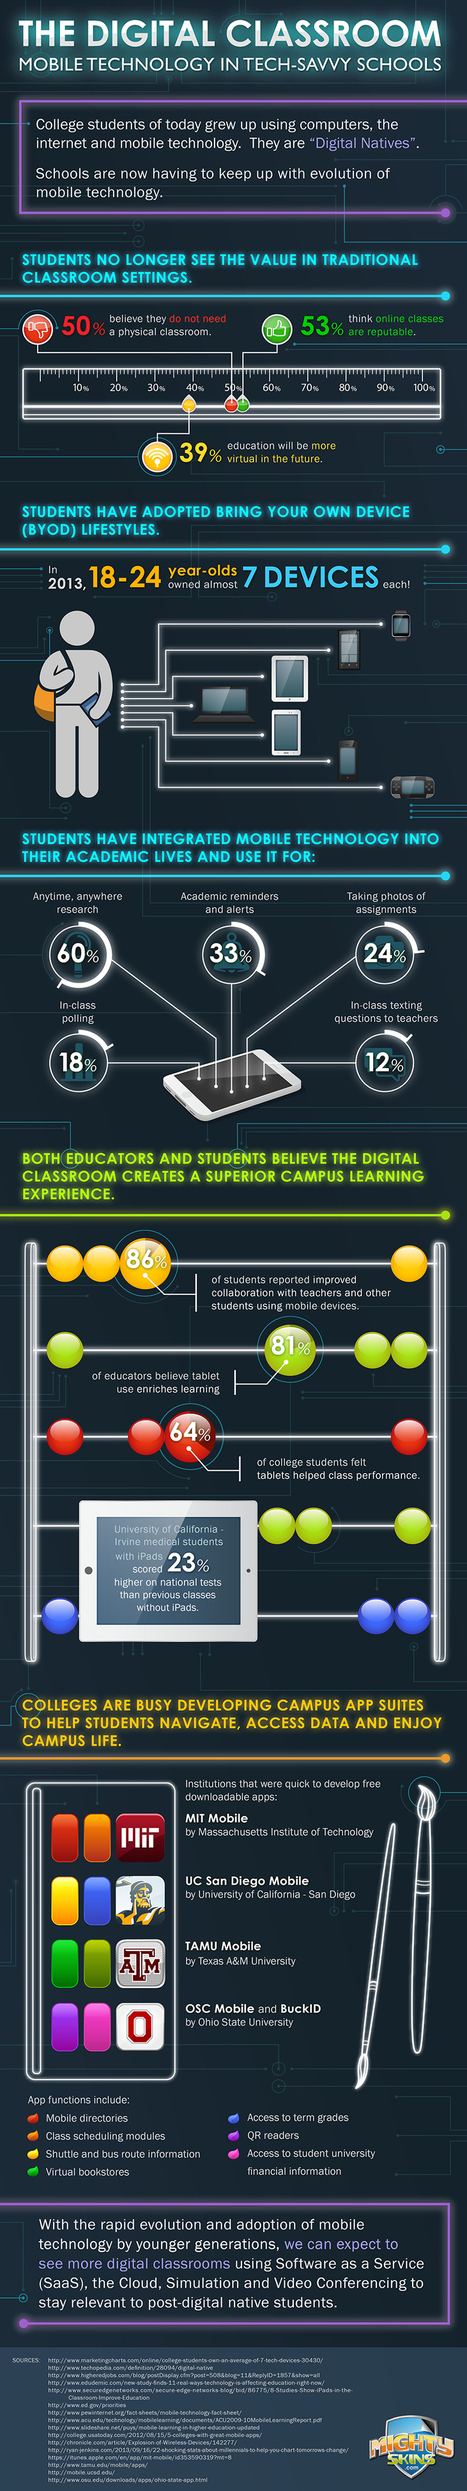 The Dawn of the Digital Classroom [Infographic] | Education 2.0 & 3.0 | Scoop.it